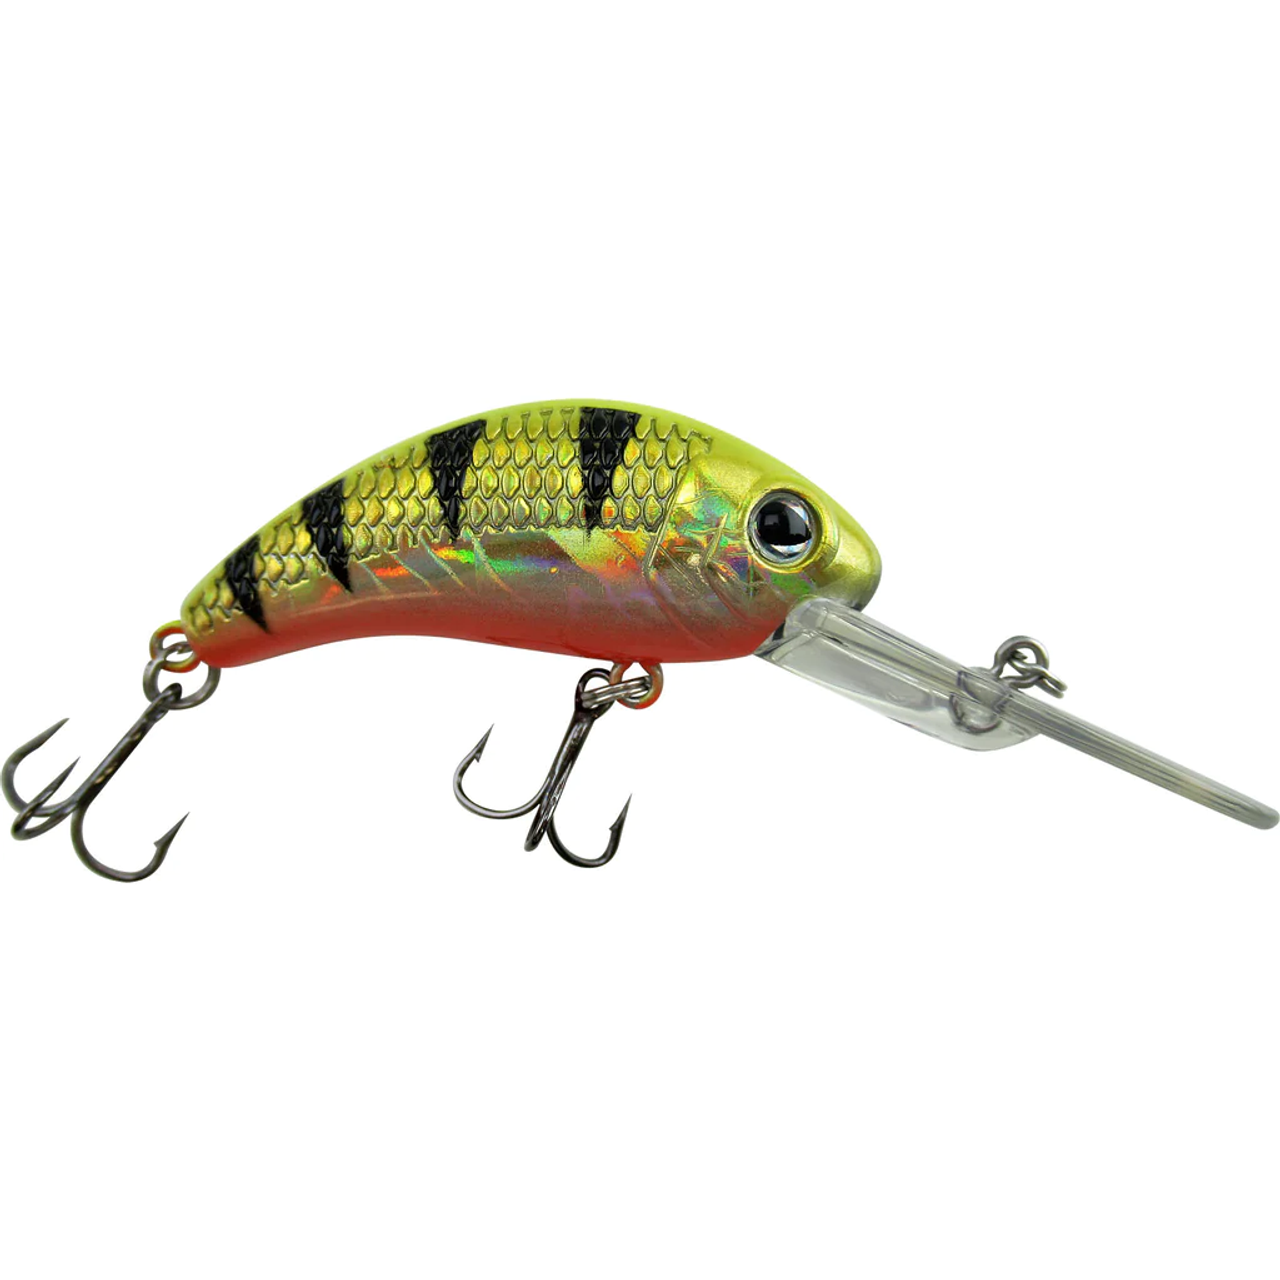 Walleye Nation Creations Boogie Shad, Banana Style Crankbait, Size 2", 17' Diving depth, Goldaliscious